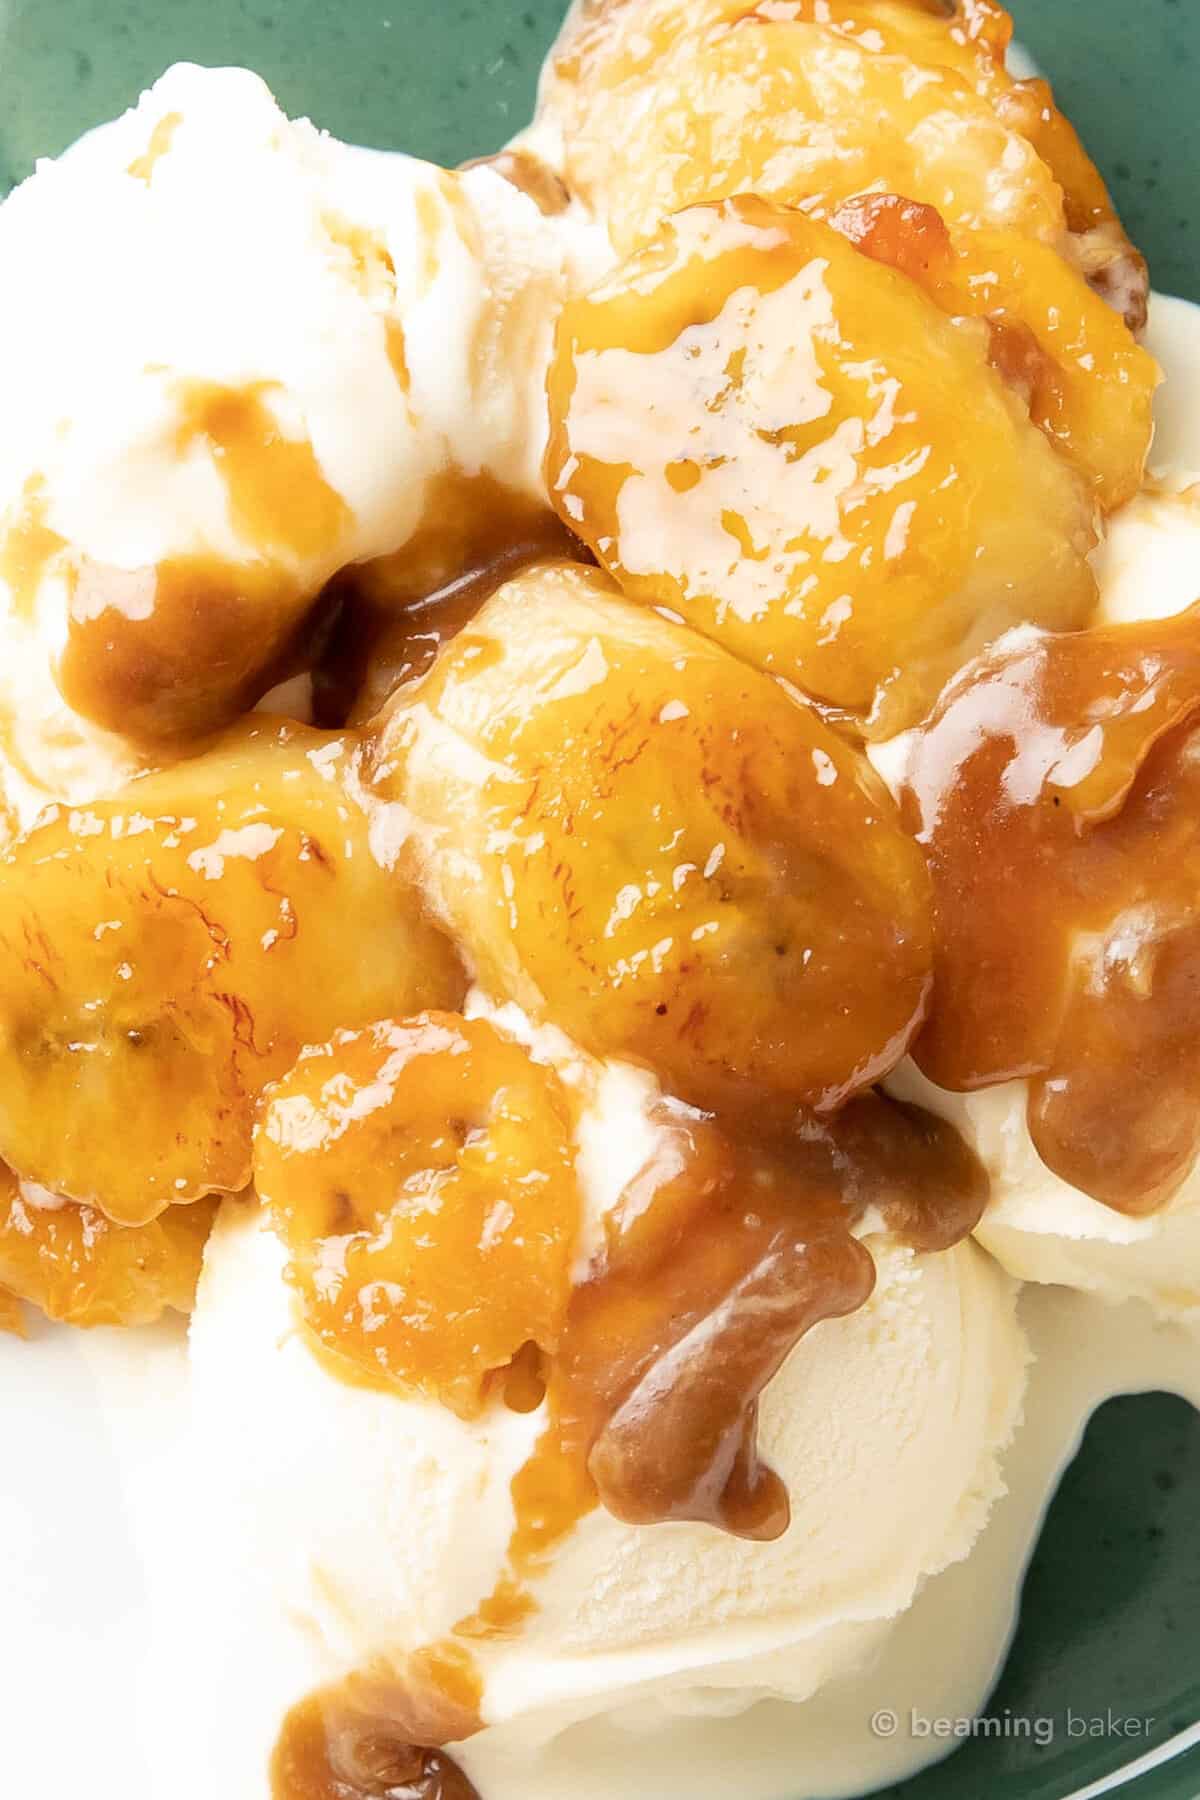 close up to showcase creamy texture of sauce and tender bits in this dessert